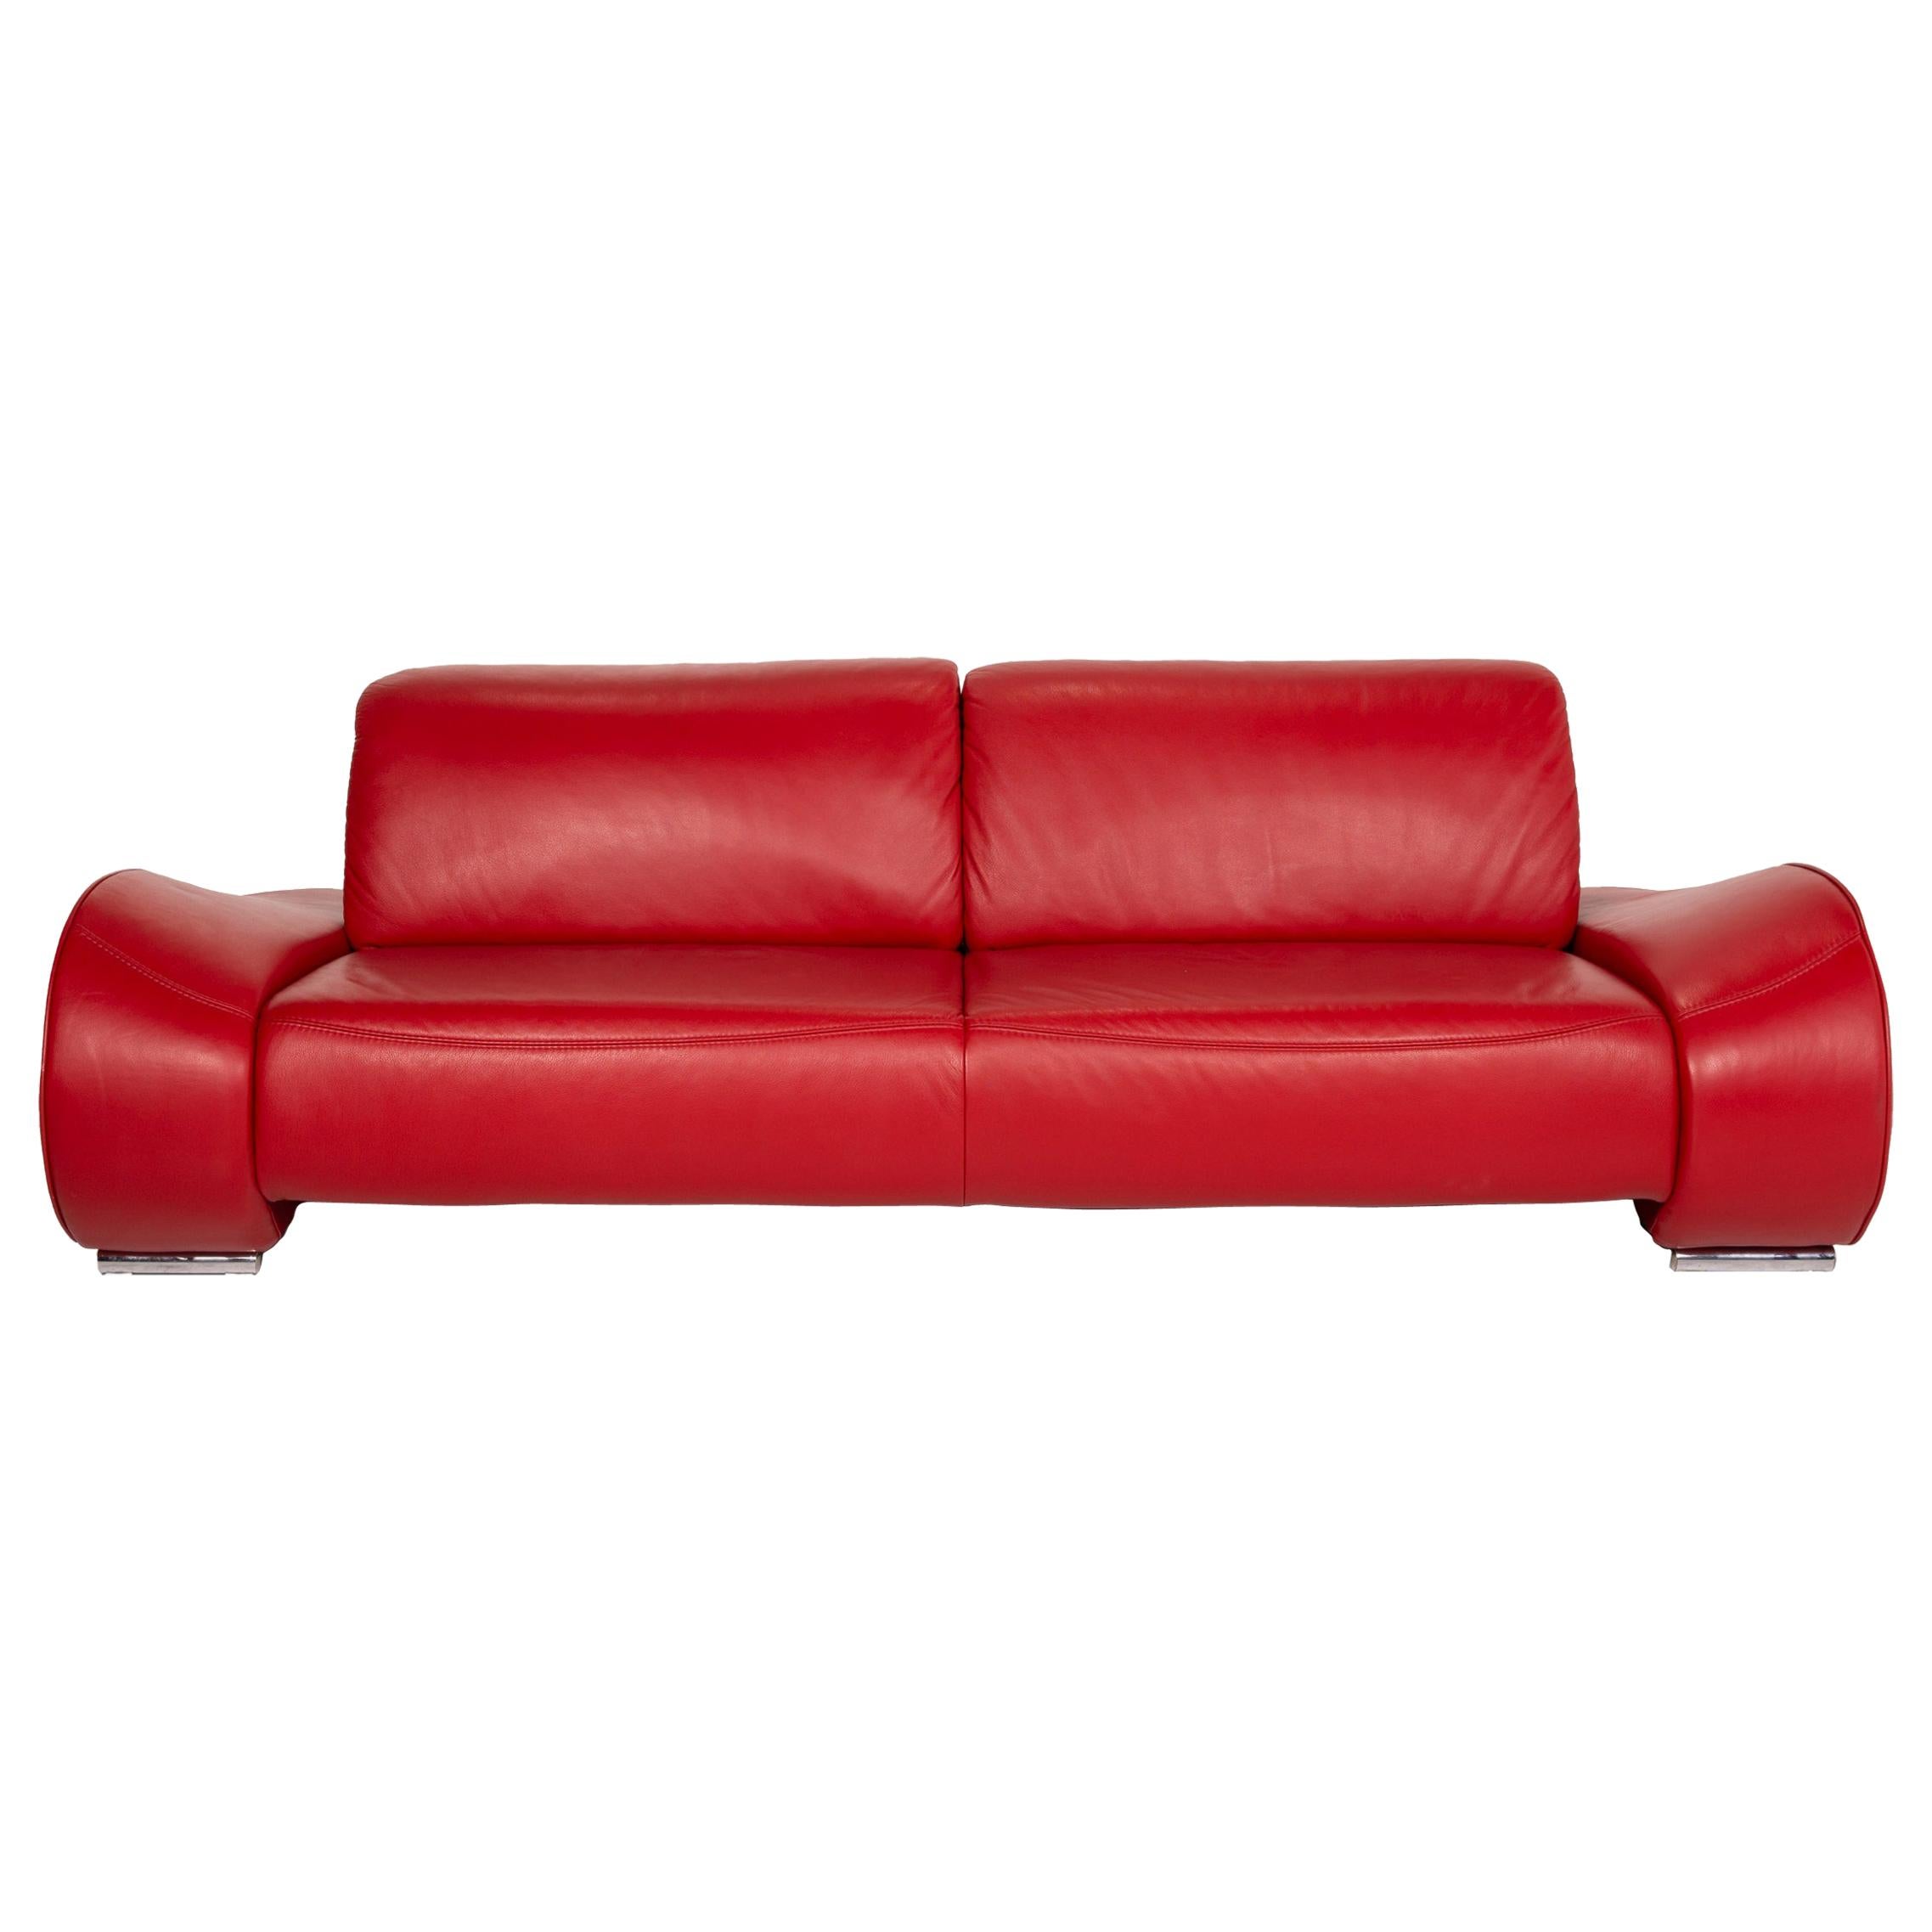 Musterring Mr-740 Leather Sofa Red Three-Seater Function